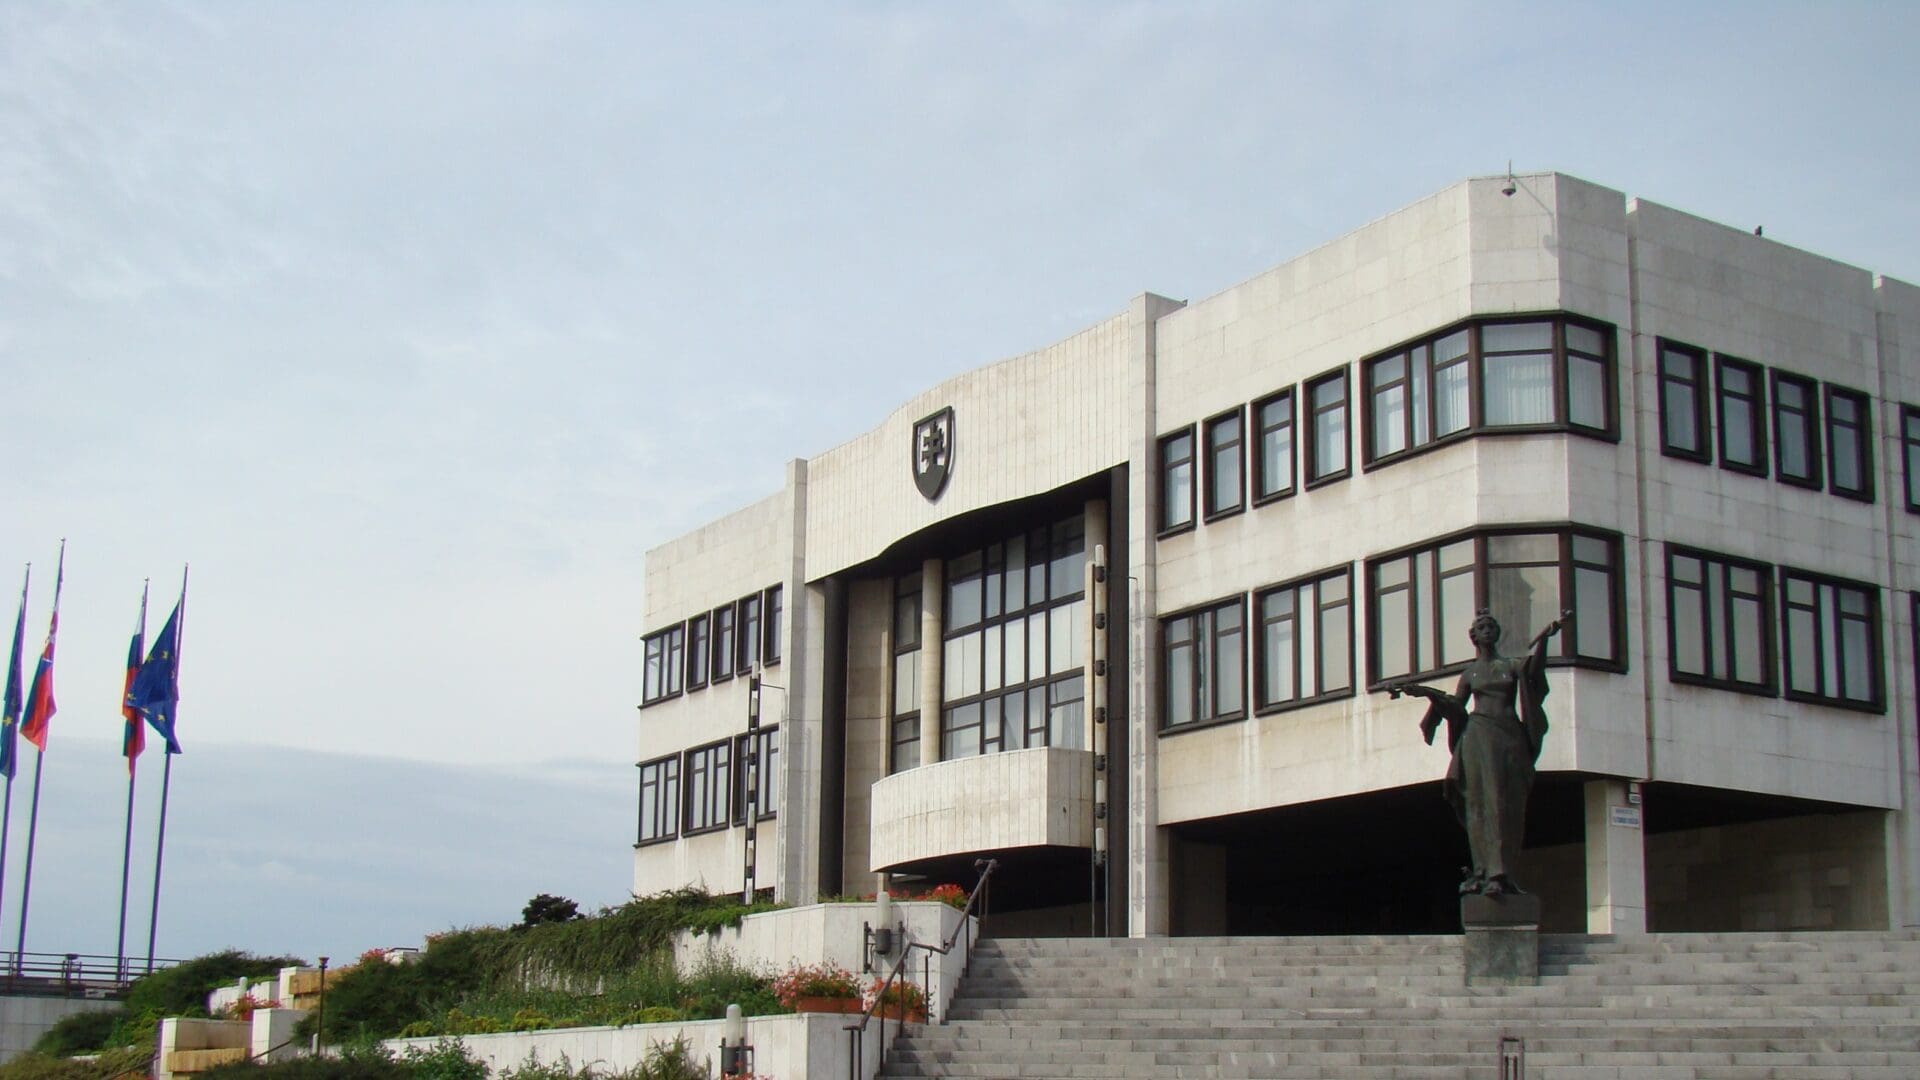 The building of the Slovak National Council.